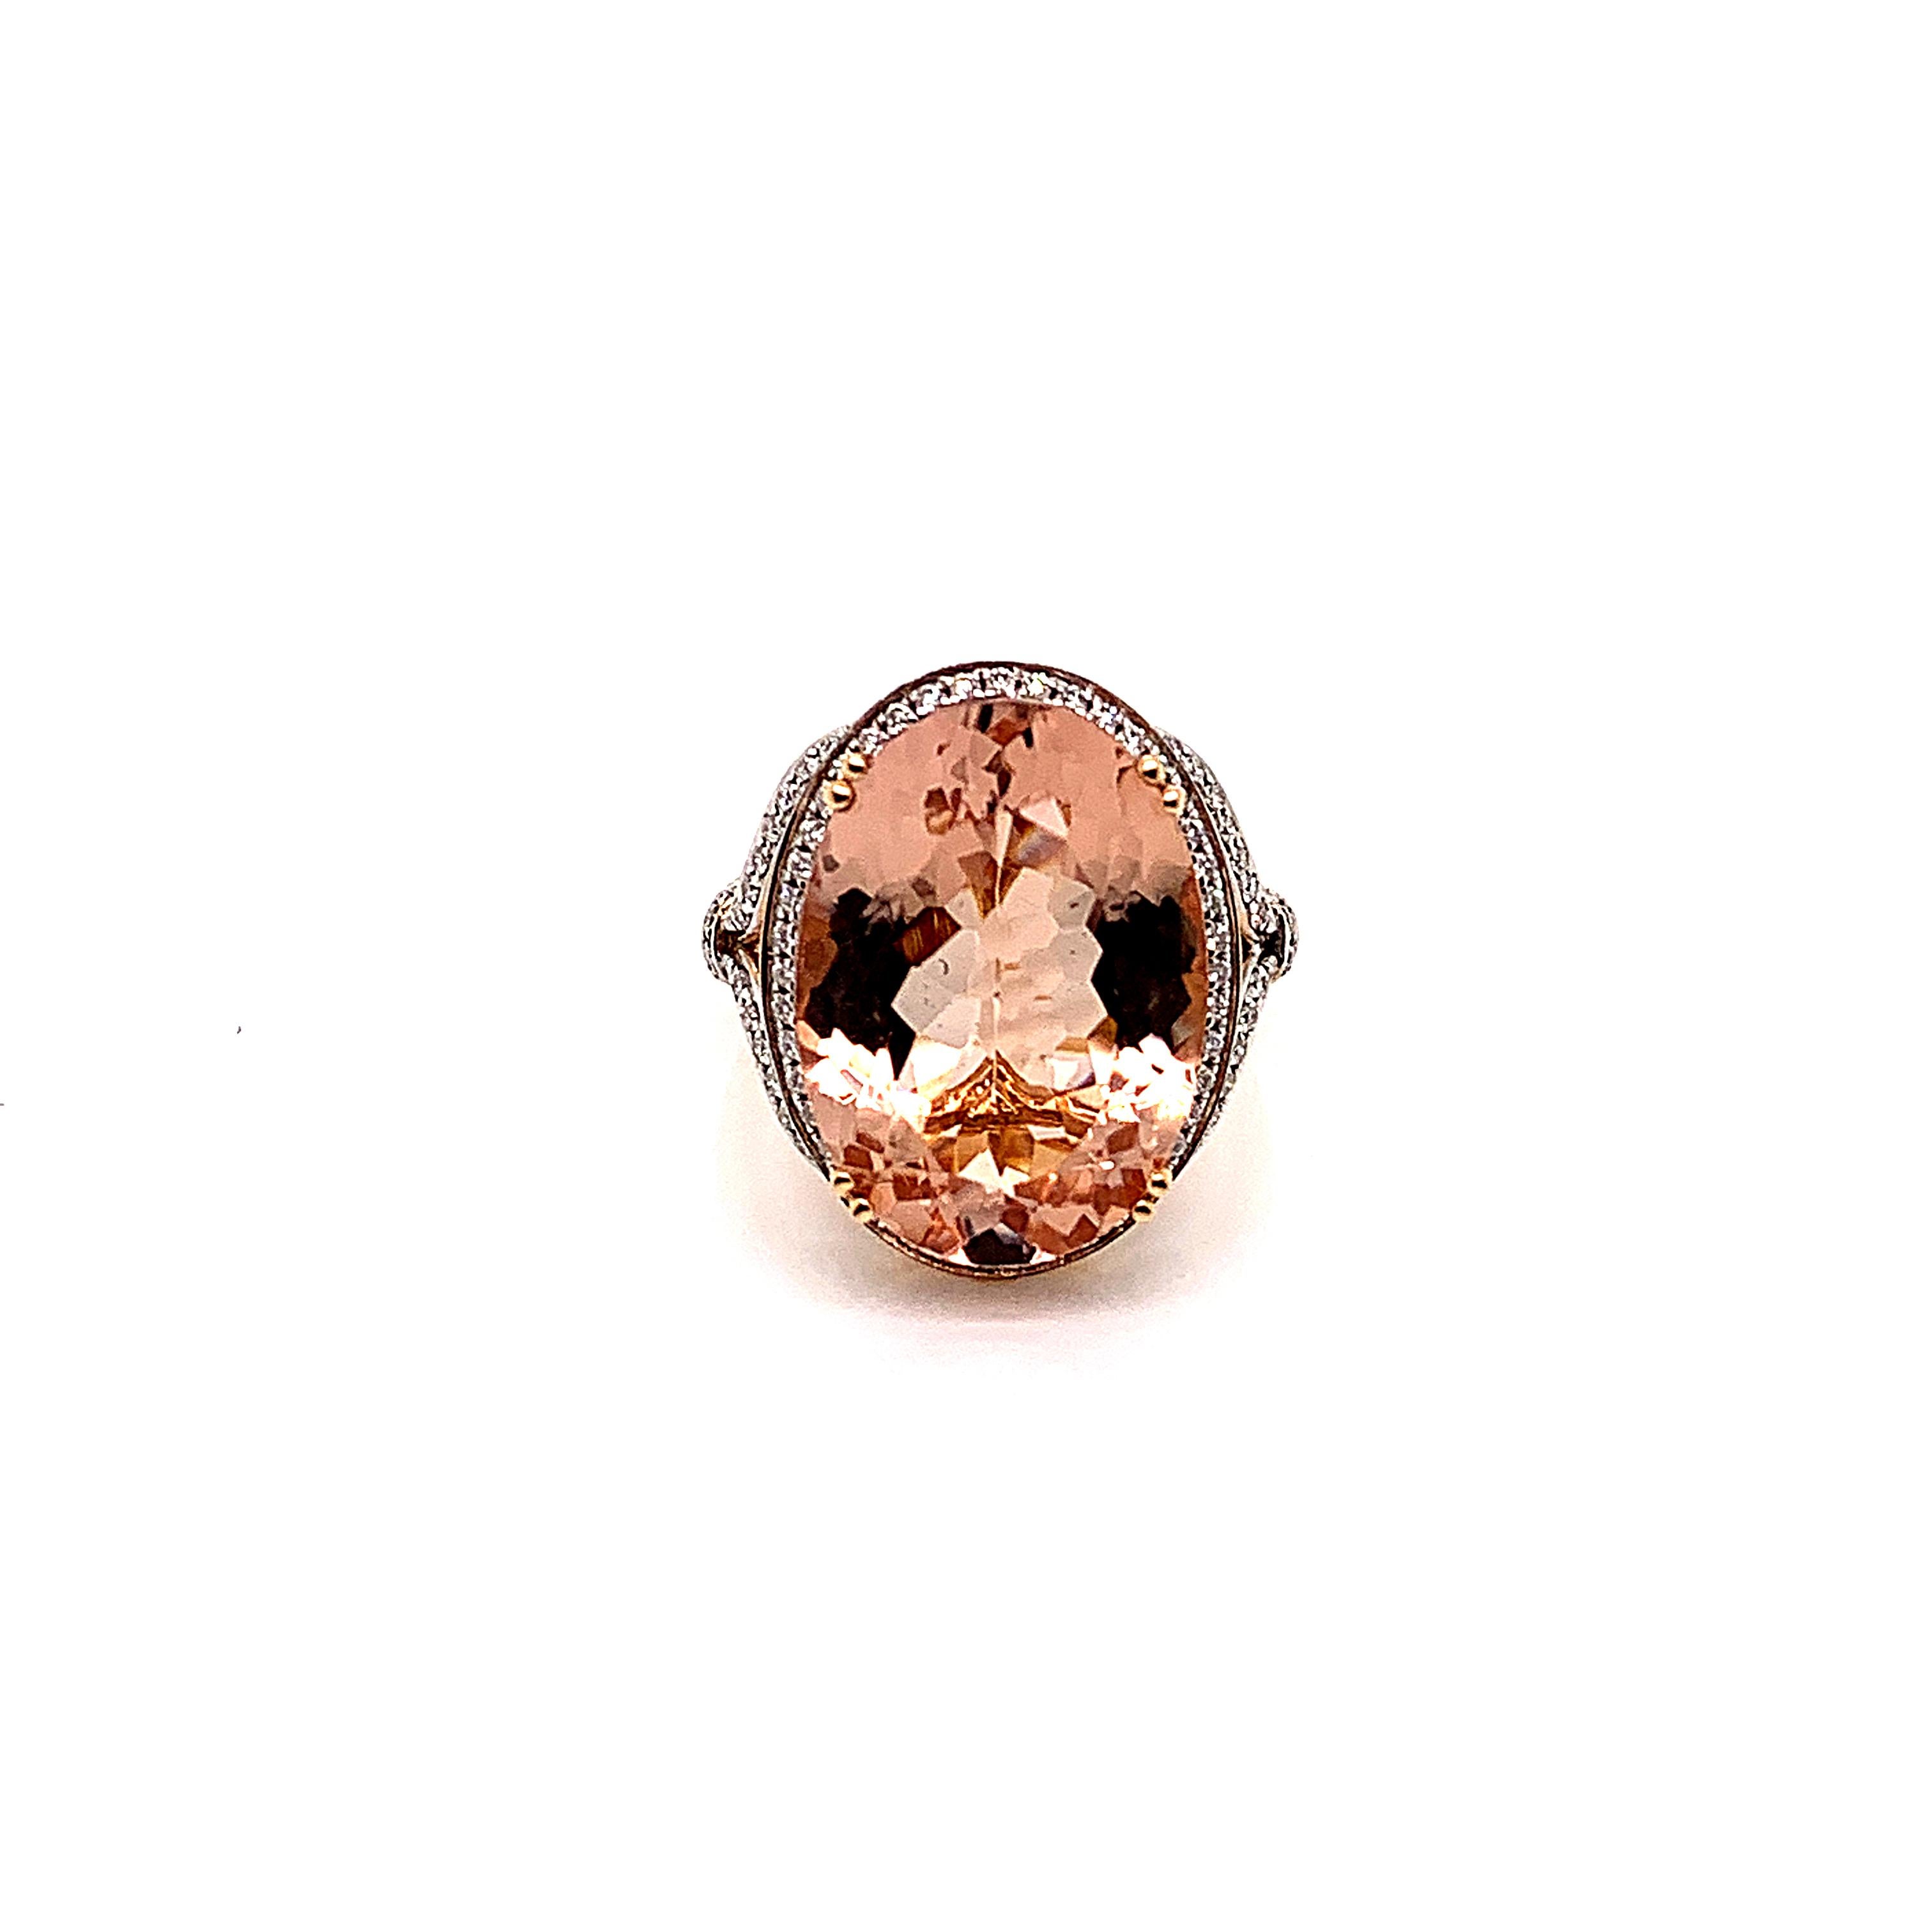 This collection features an array of magnificent morganites! Accented with diamonds these rings are made in rose gold and so give a classic yet elegant look. 

Classic morganite ring in 18K rose gold with diamonds. 

Morganite: 11.84 carat oval